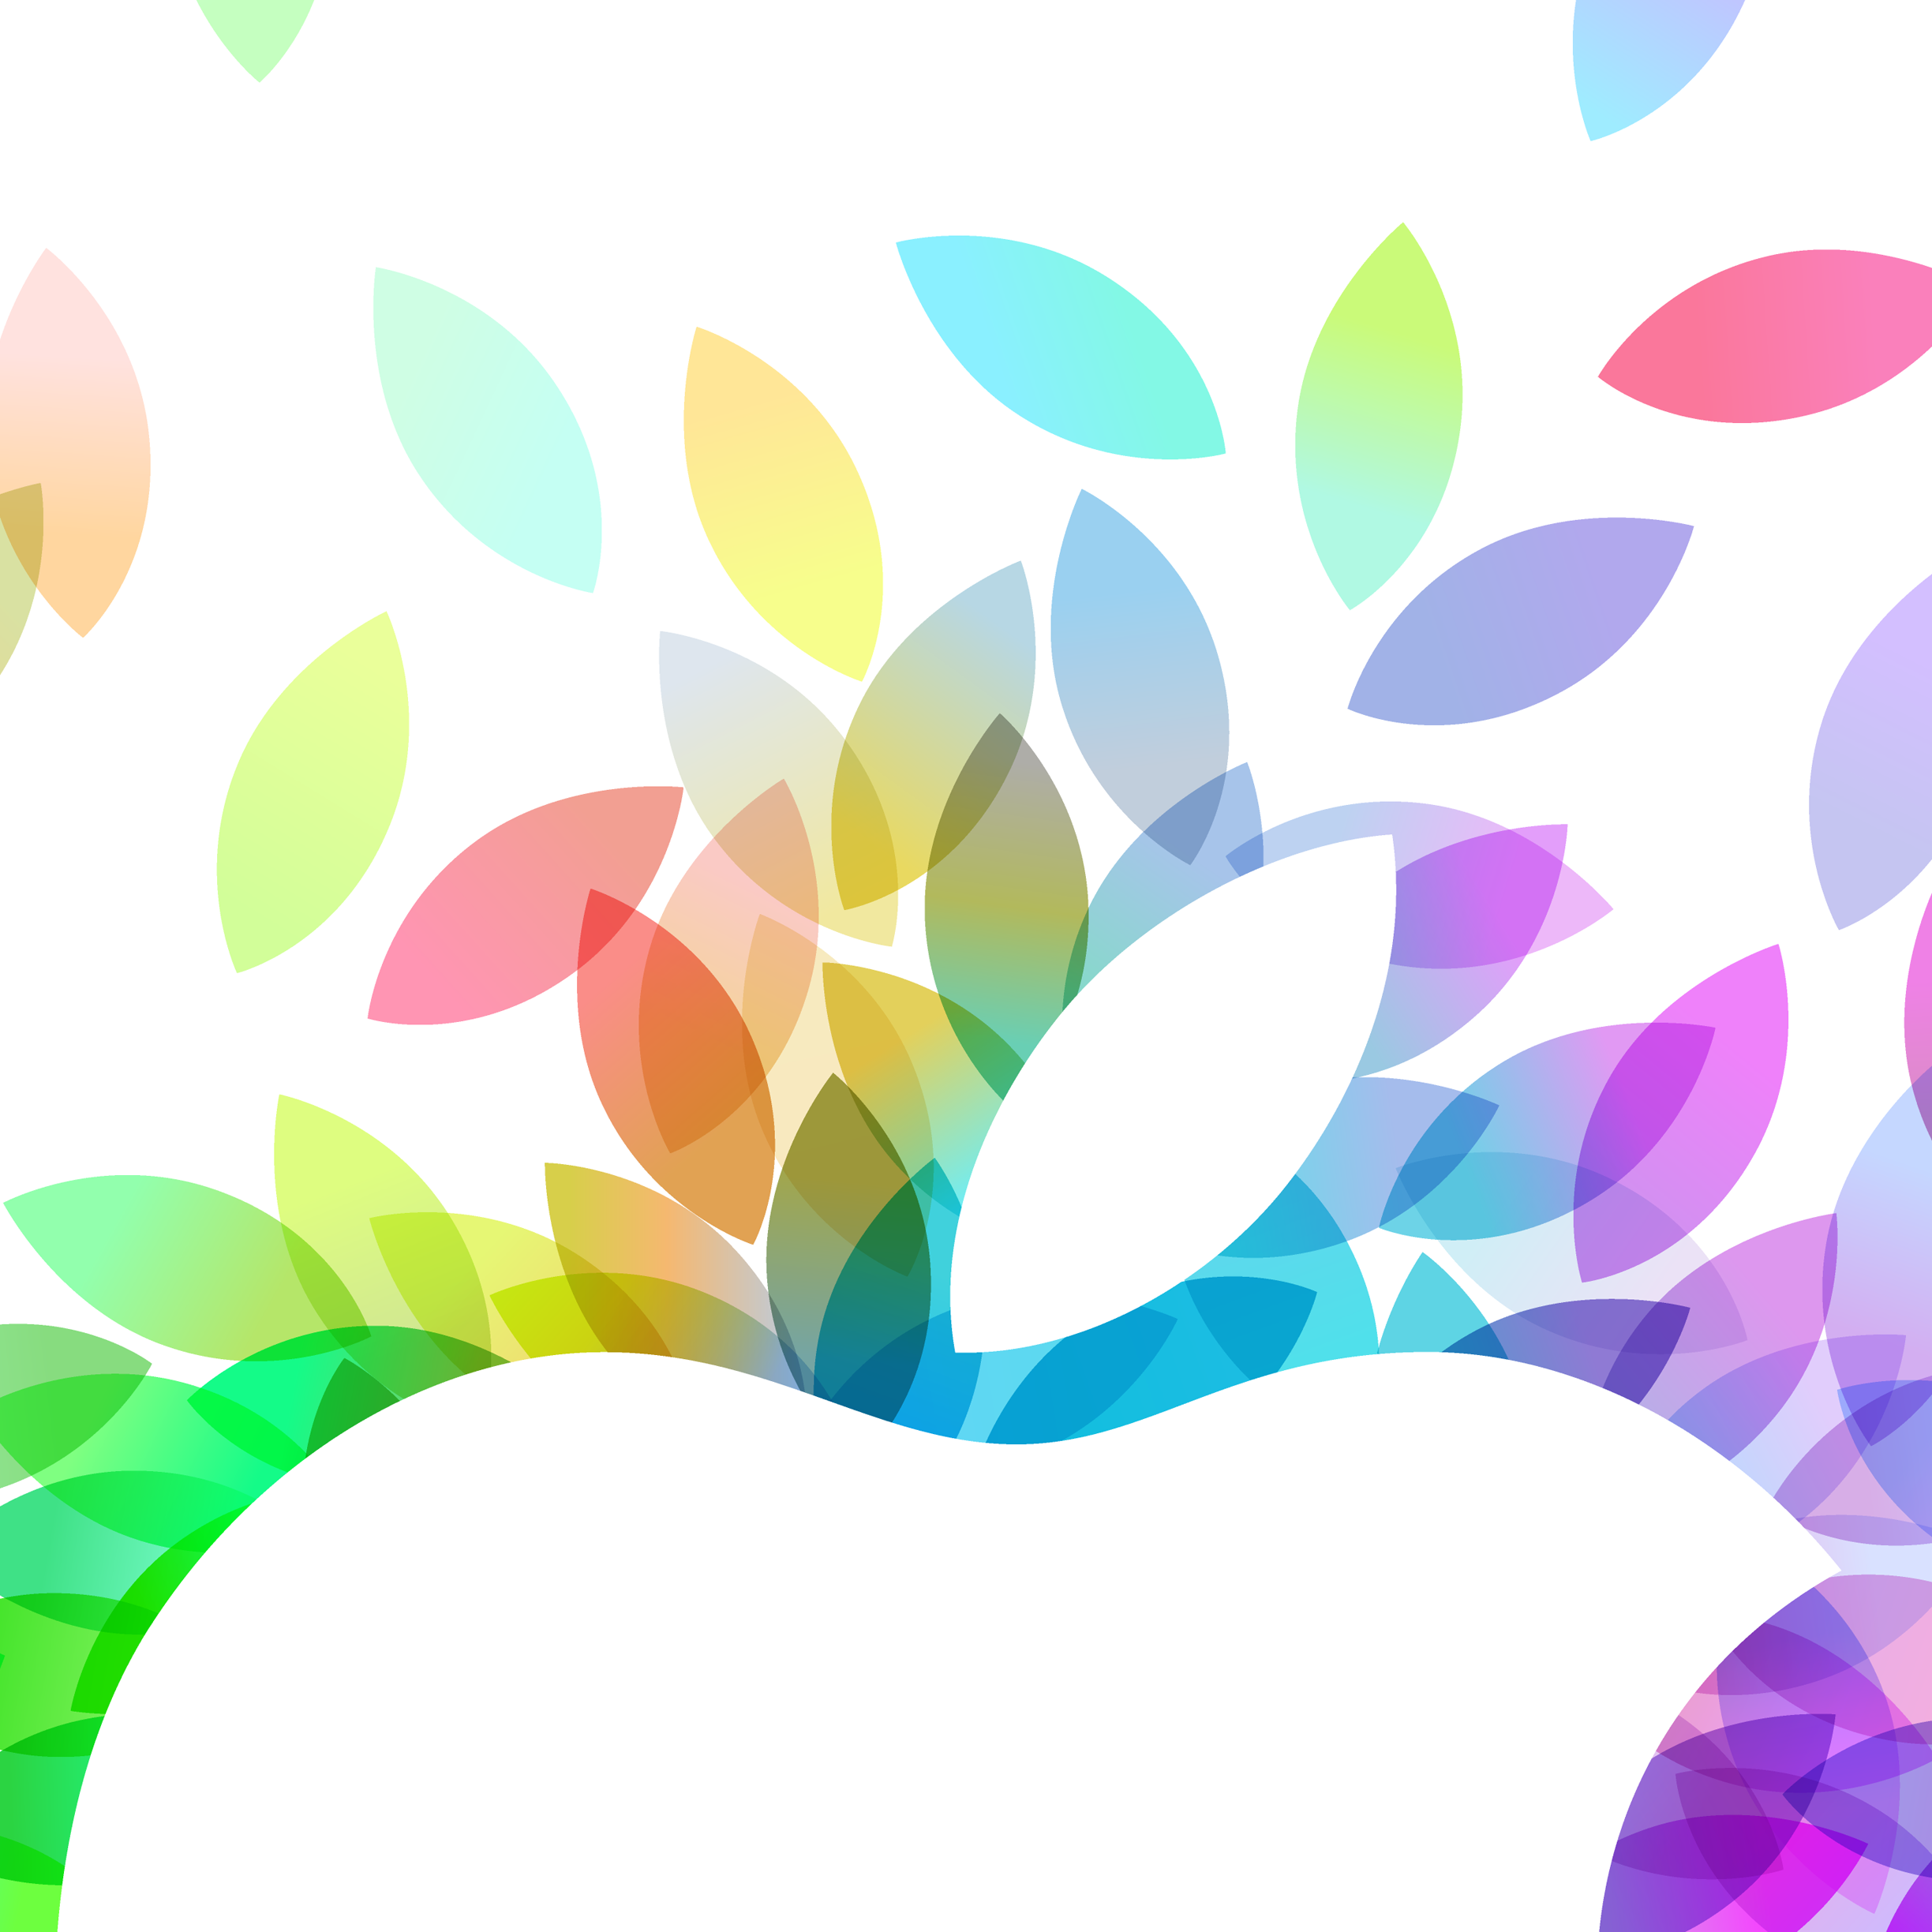 Today's Apple Special Event to be live streamed